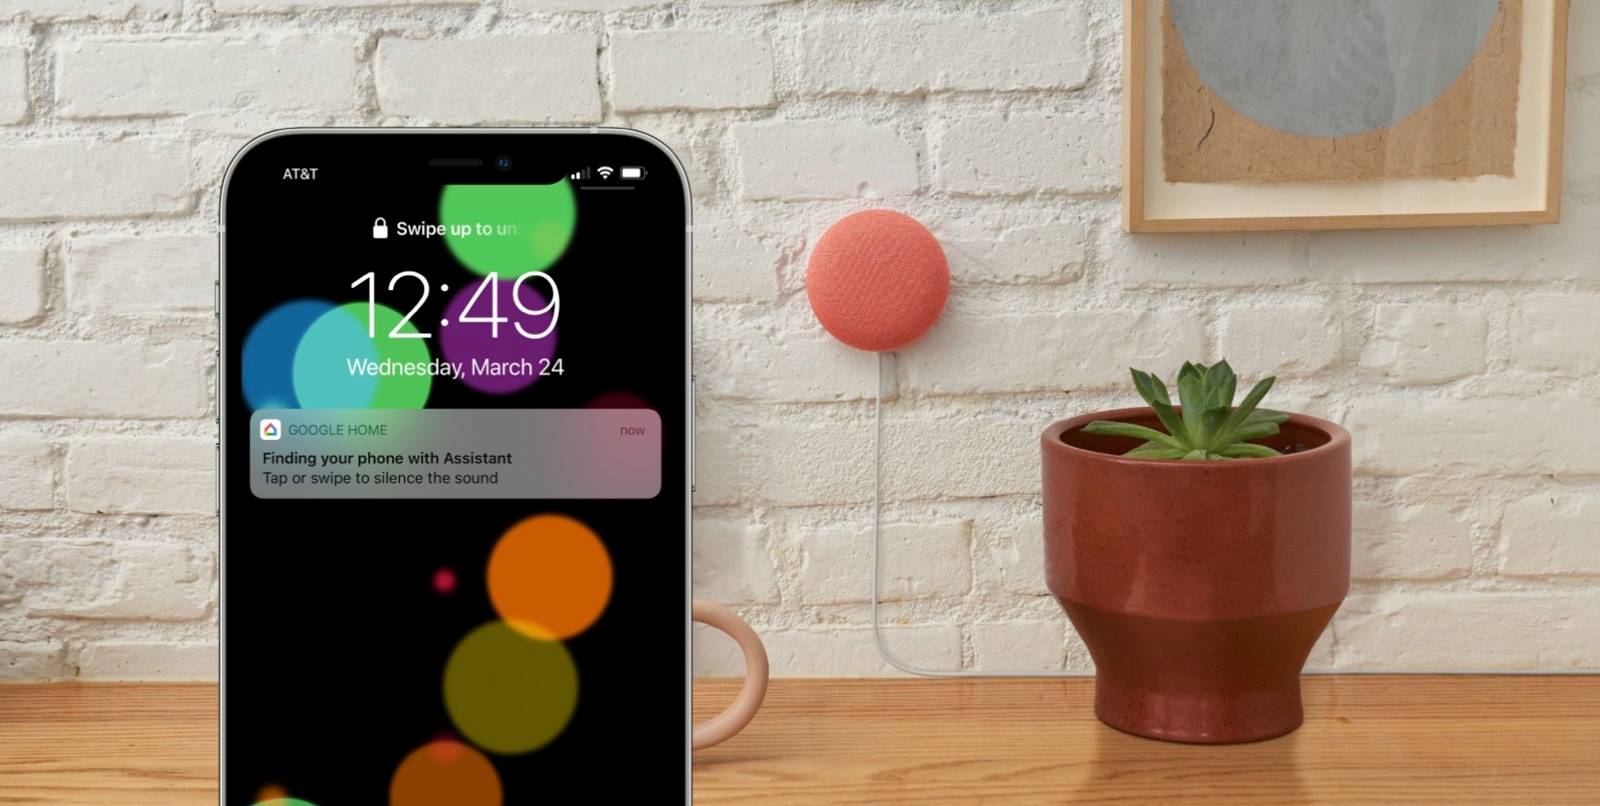 Google Assistant can now attend you to accumulate your missing iPhone